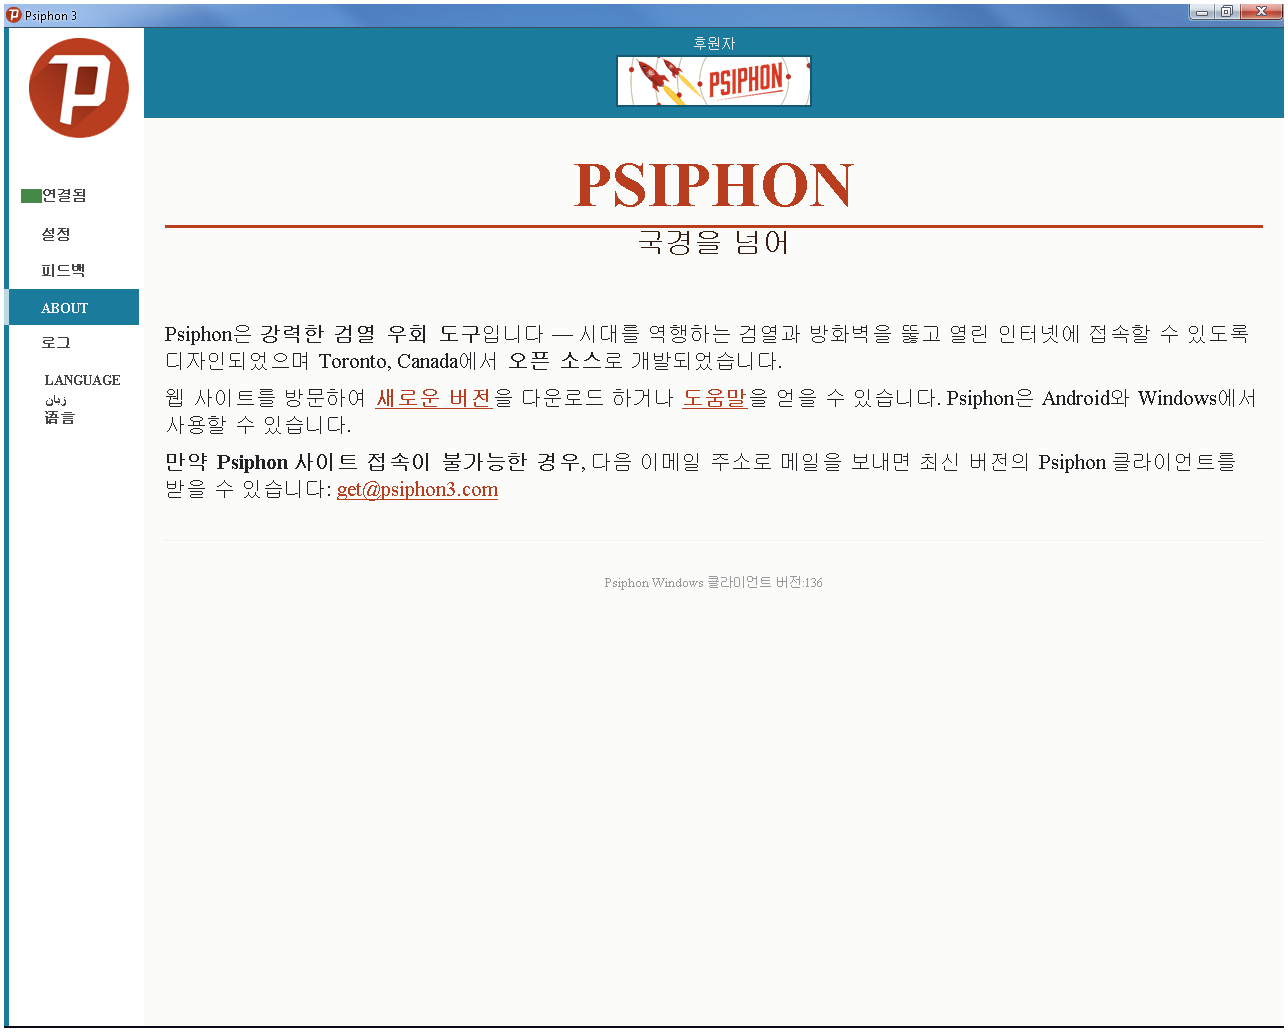 psiphon 3 download for windows